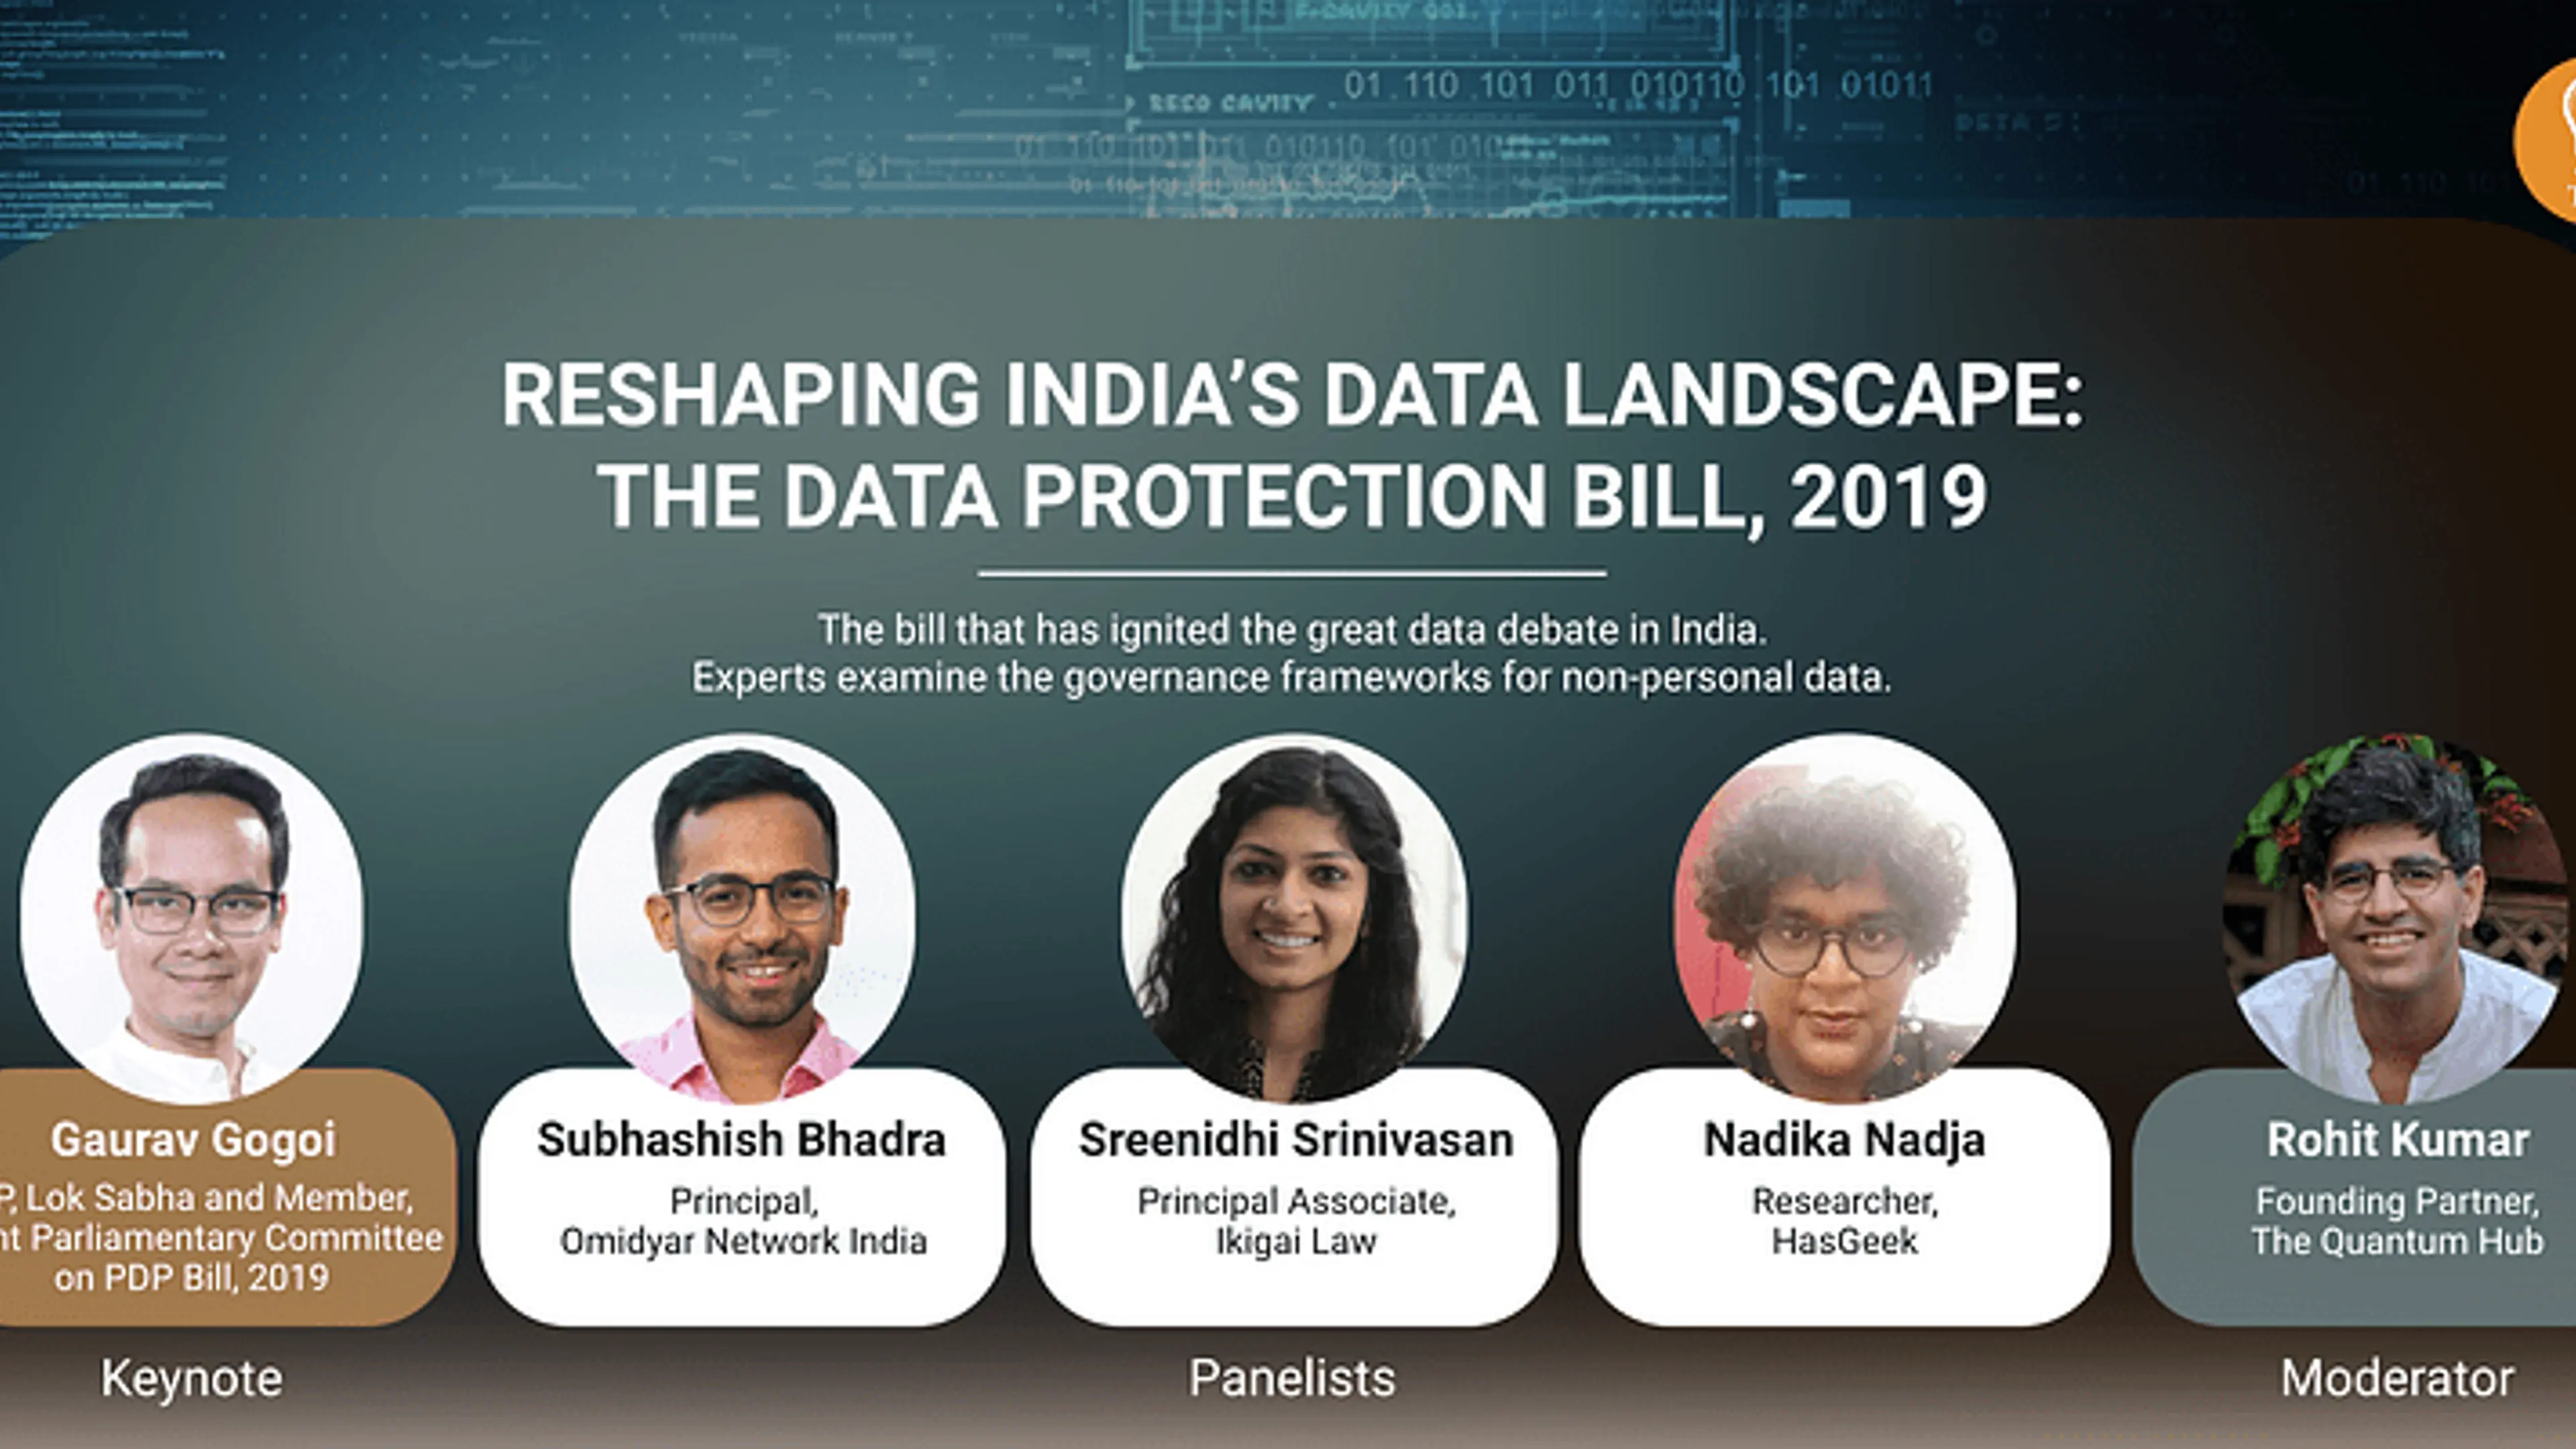 Is India ready for the regulation of Non-Personal Data under the Personal Data Protection Bill, 2019?